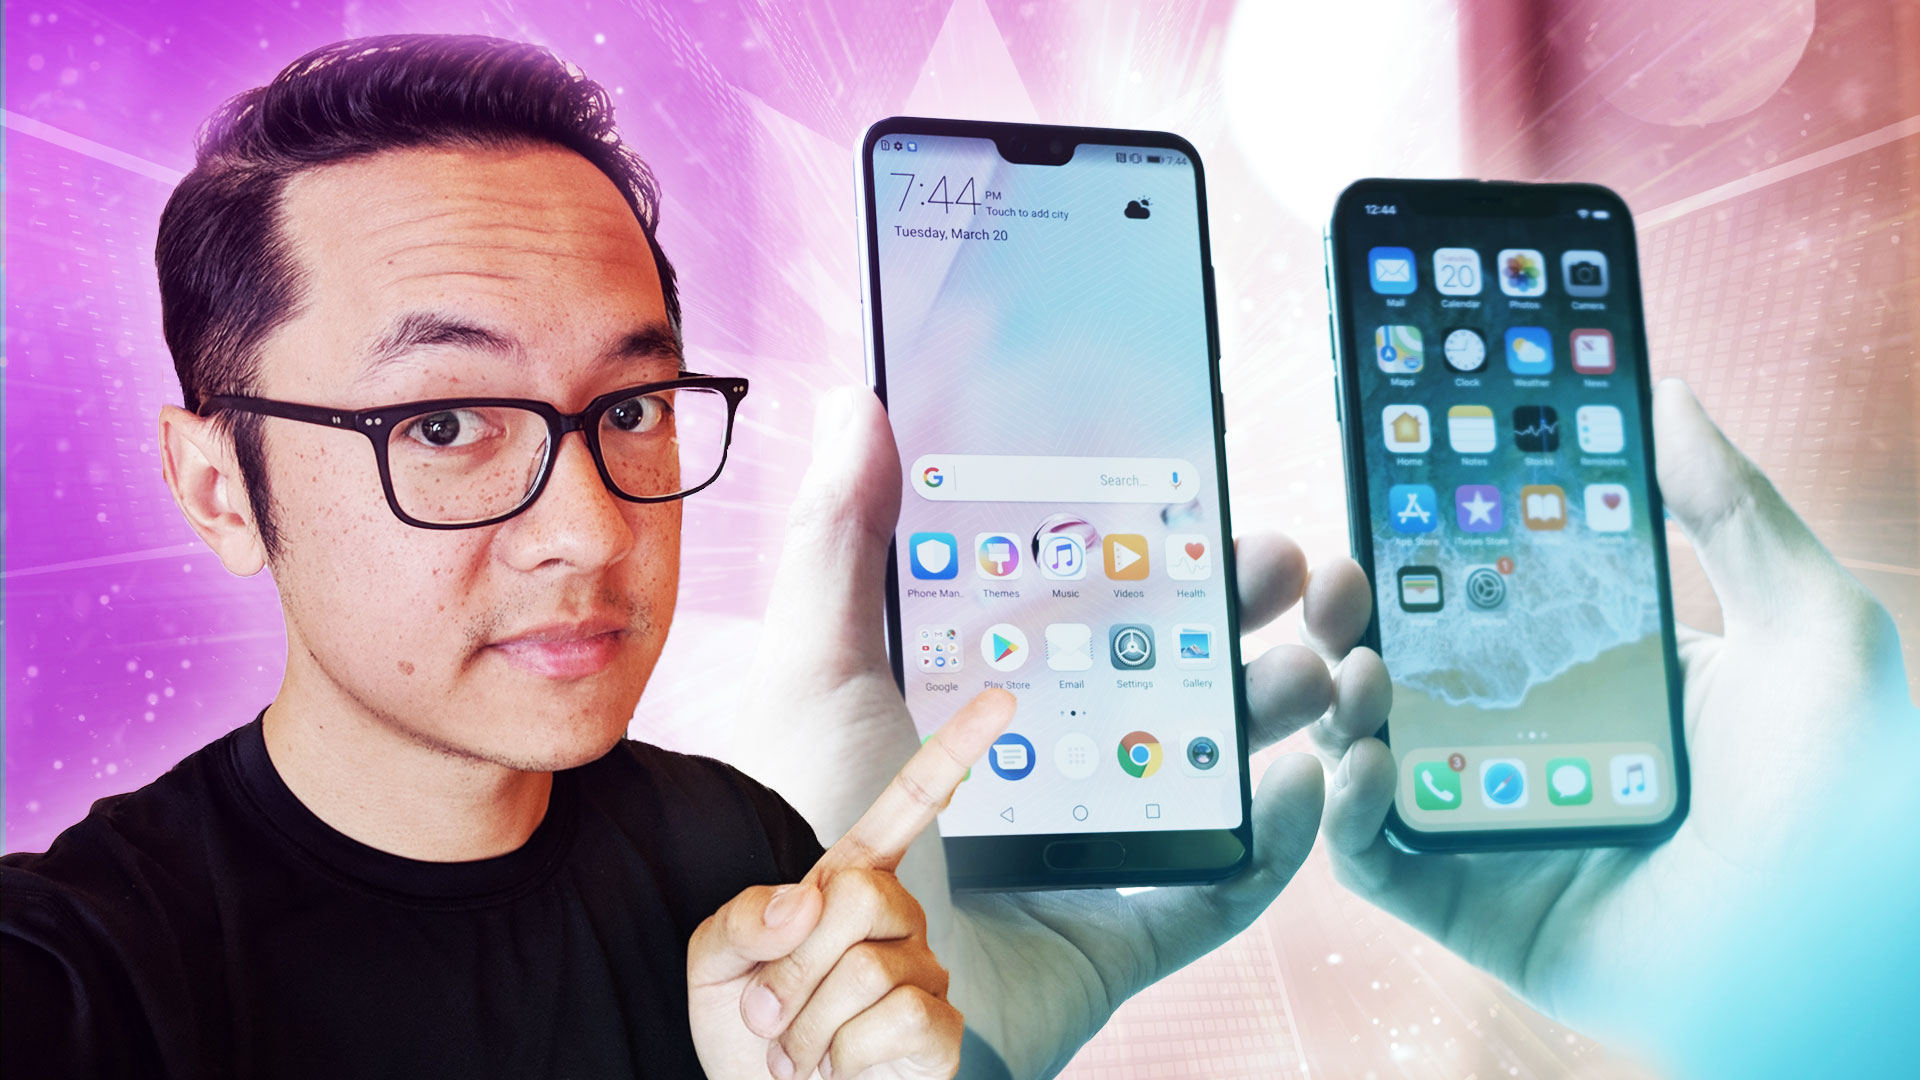 HUAWEI P20 Pro vs iPhone X - Who wins the battle of giants?